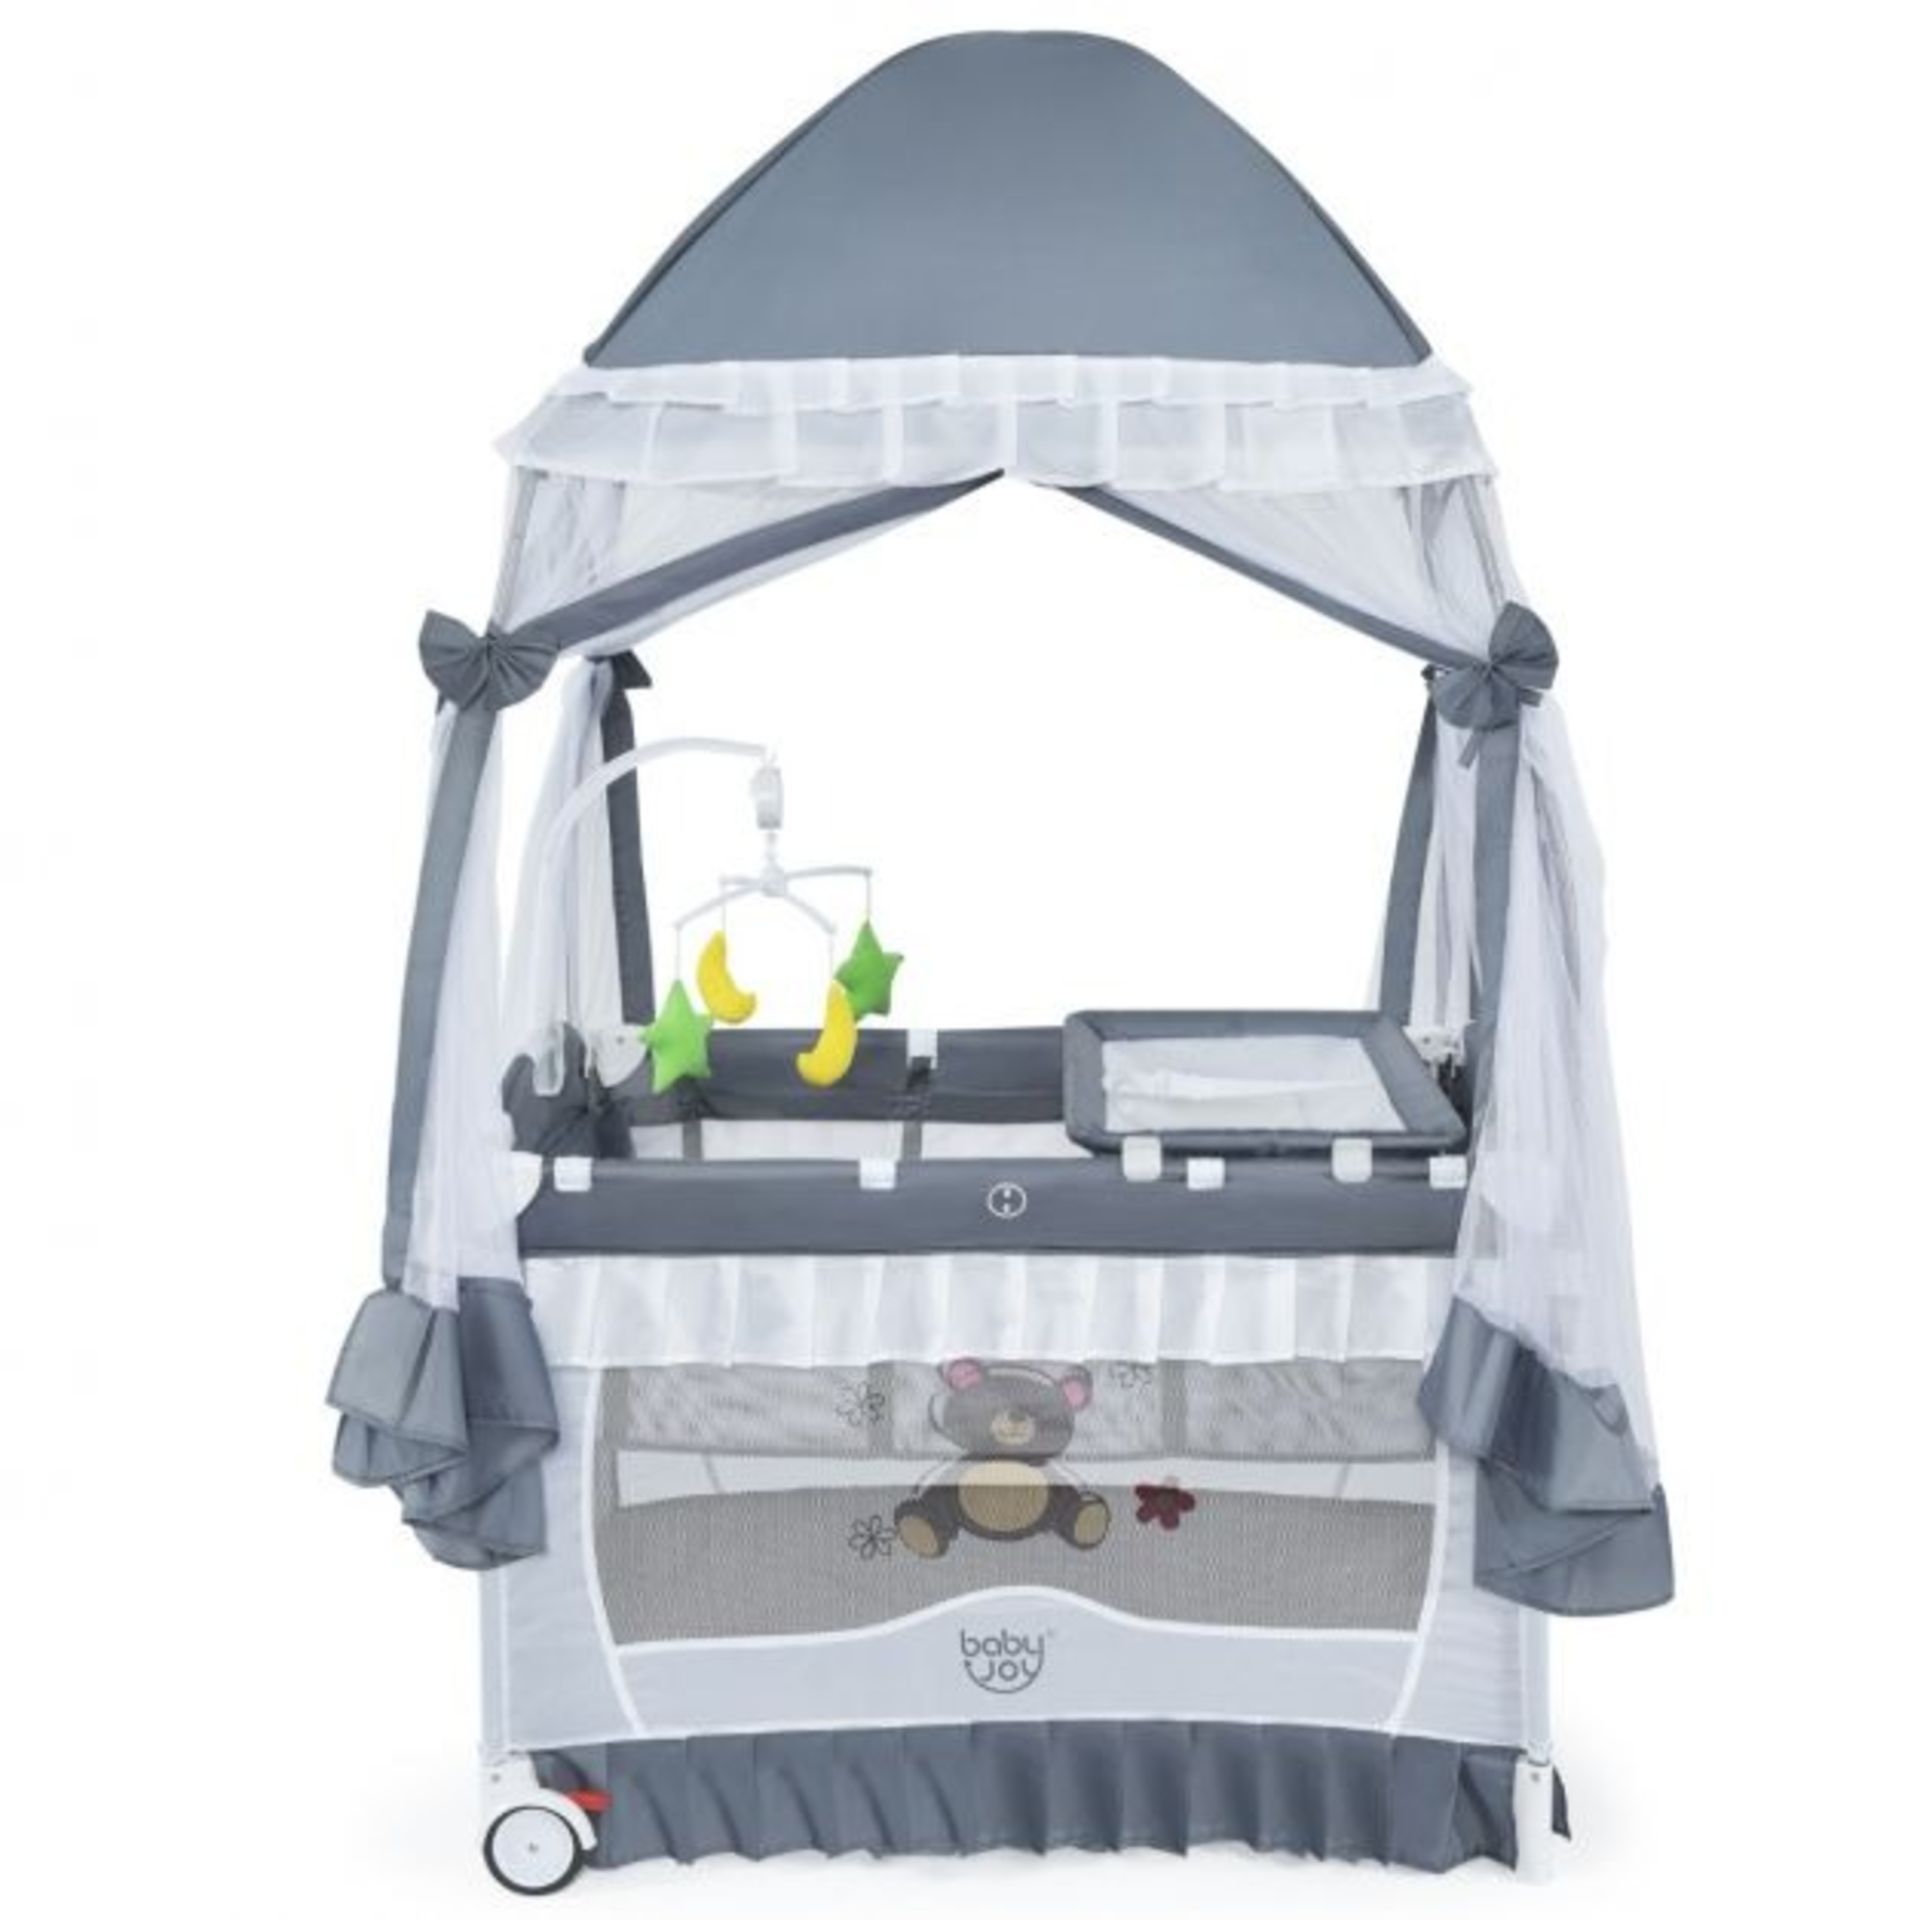 4 in 1 Convertible Baby Bed with Detachable Canopy and Changing Table Grey - ER54